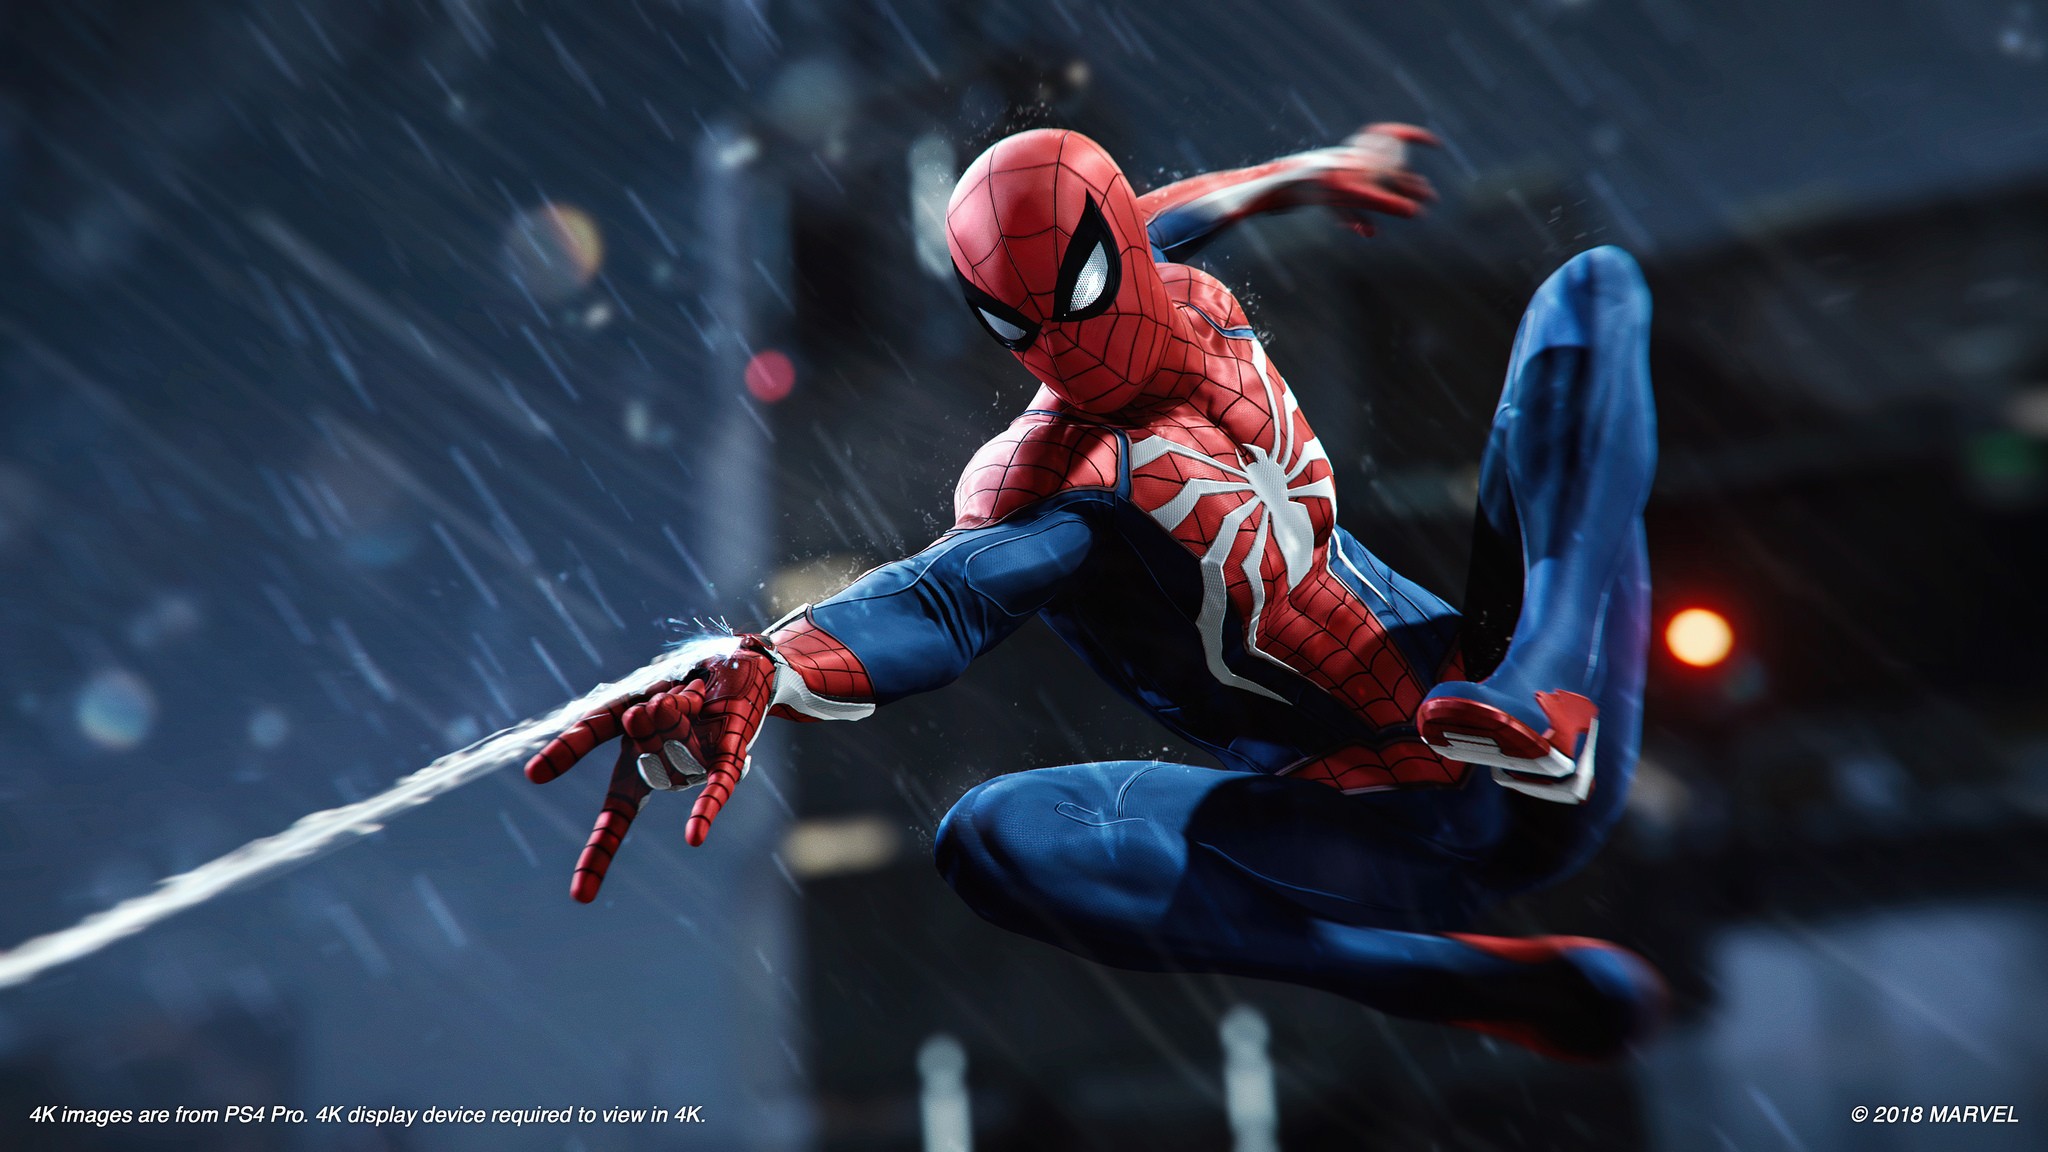 New Marvel PS5 exclusive multiplayer game coming from Insomniac claims rumour